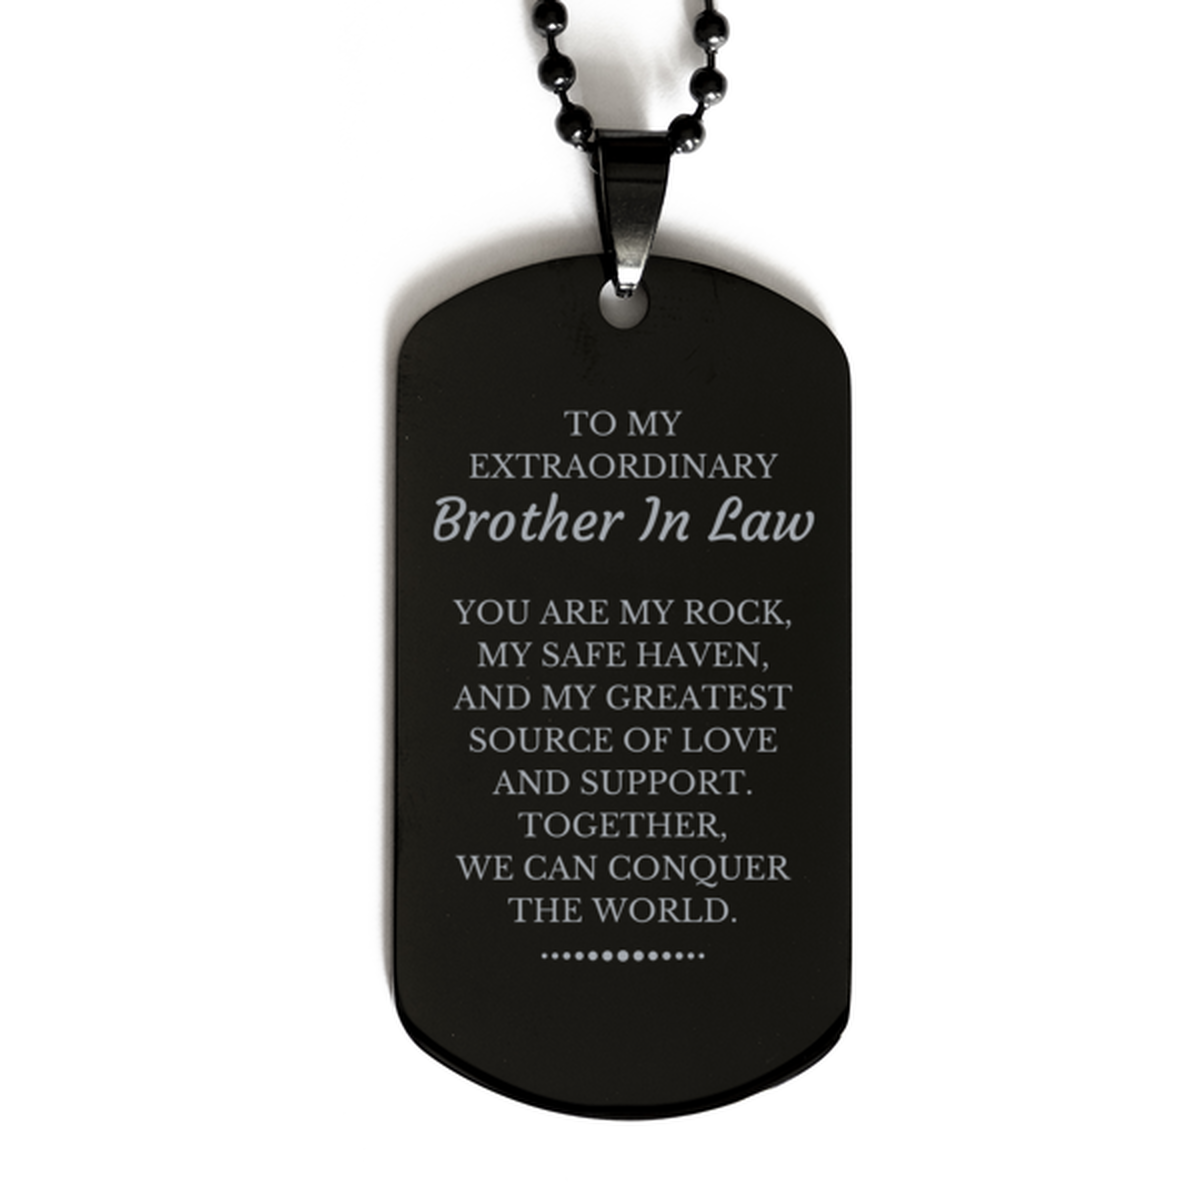 To My Extraordinary Brother In Law Gifts, Together, we can conquer the world, Birthday Black Dog Tag For Brother In Law, Christmas Gifts For Brother In Law